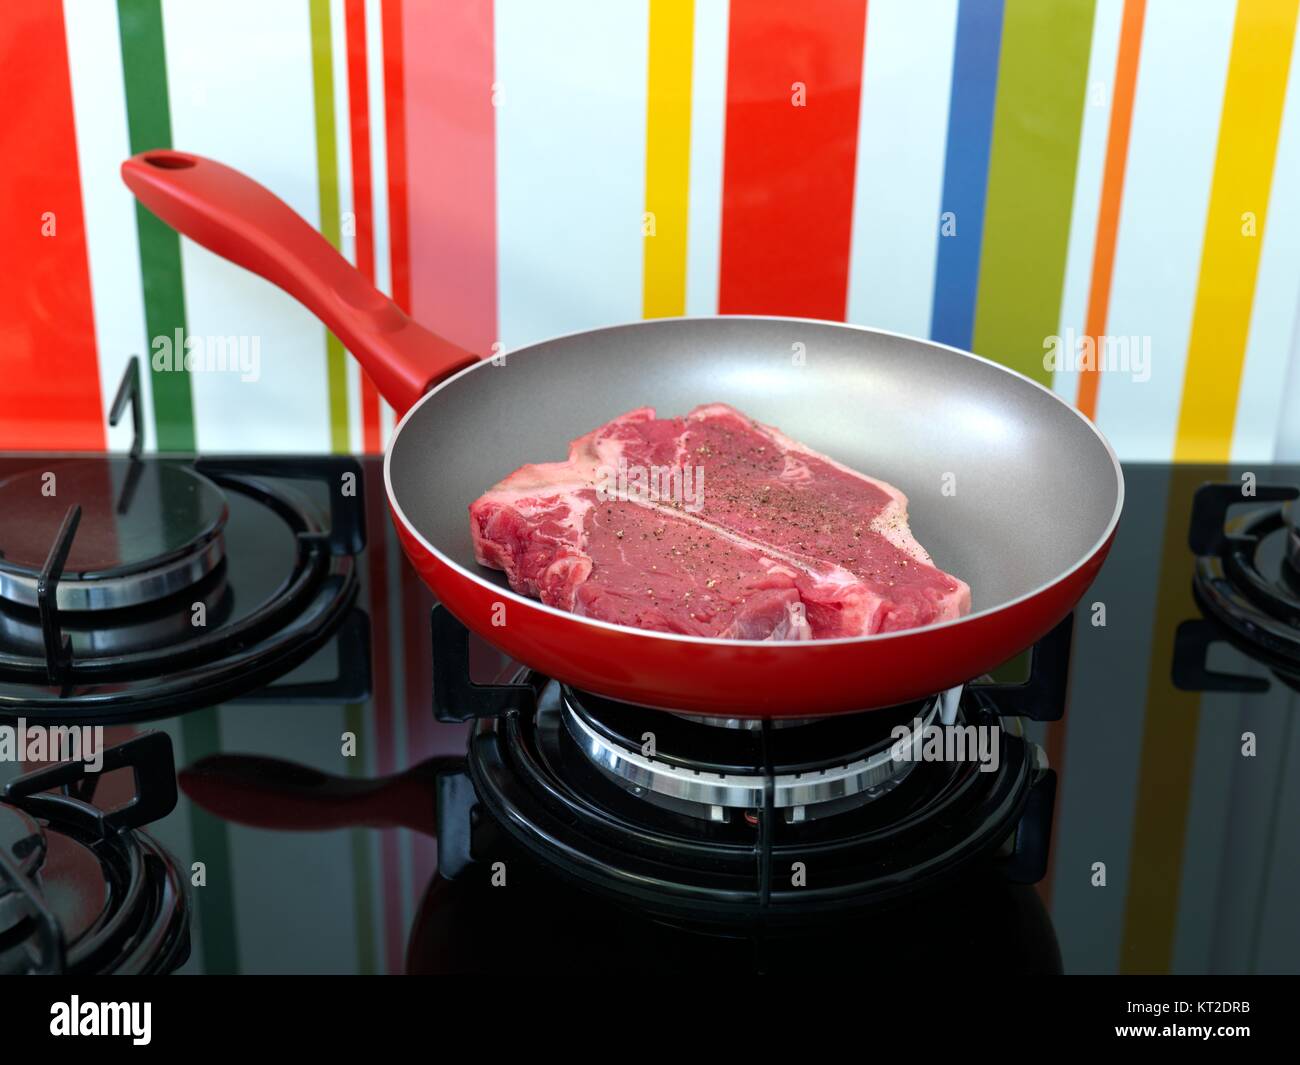 A T Bone Steak In A Frying Pan On A Stove Top Stock Photo Alamy